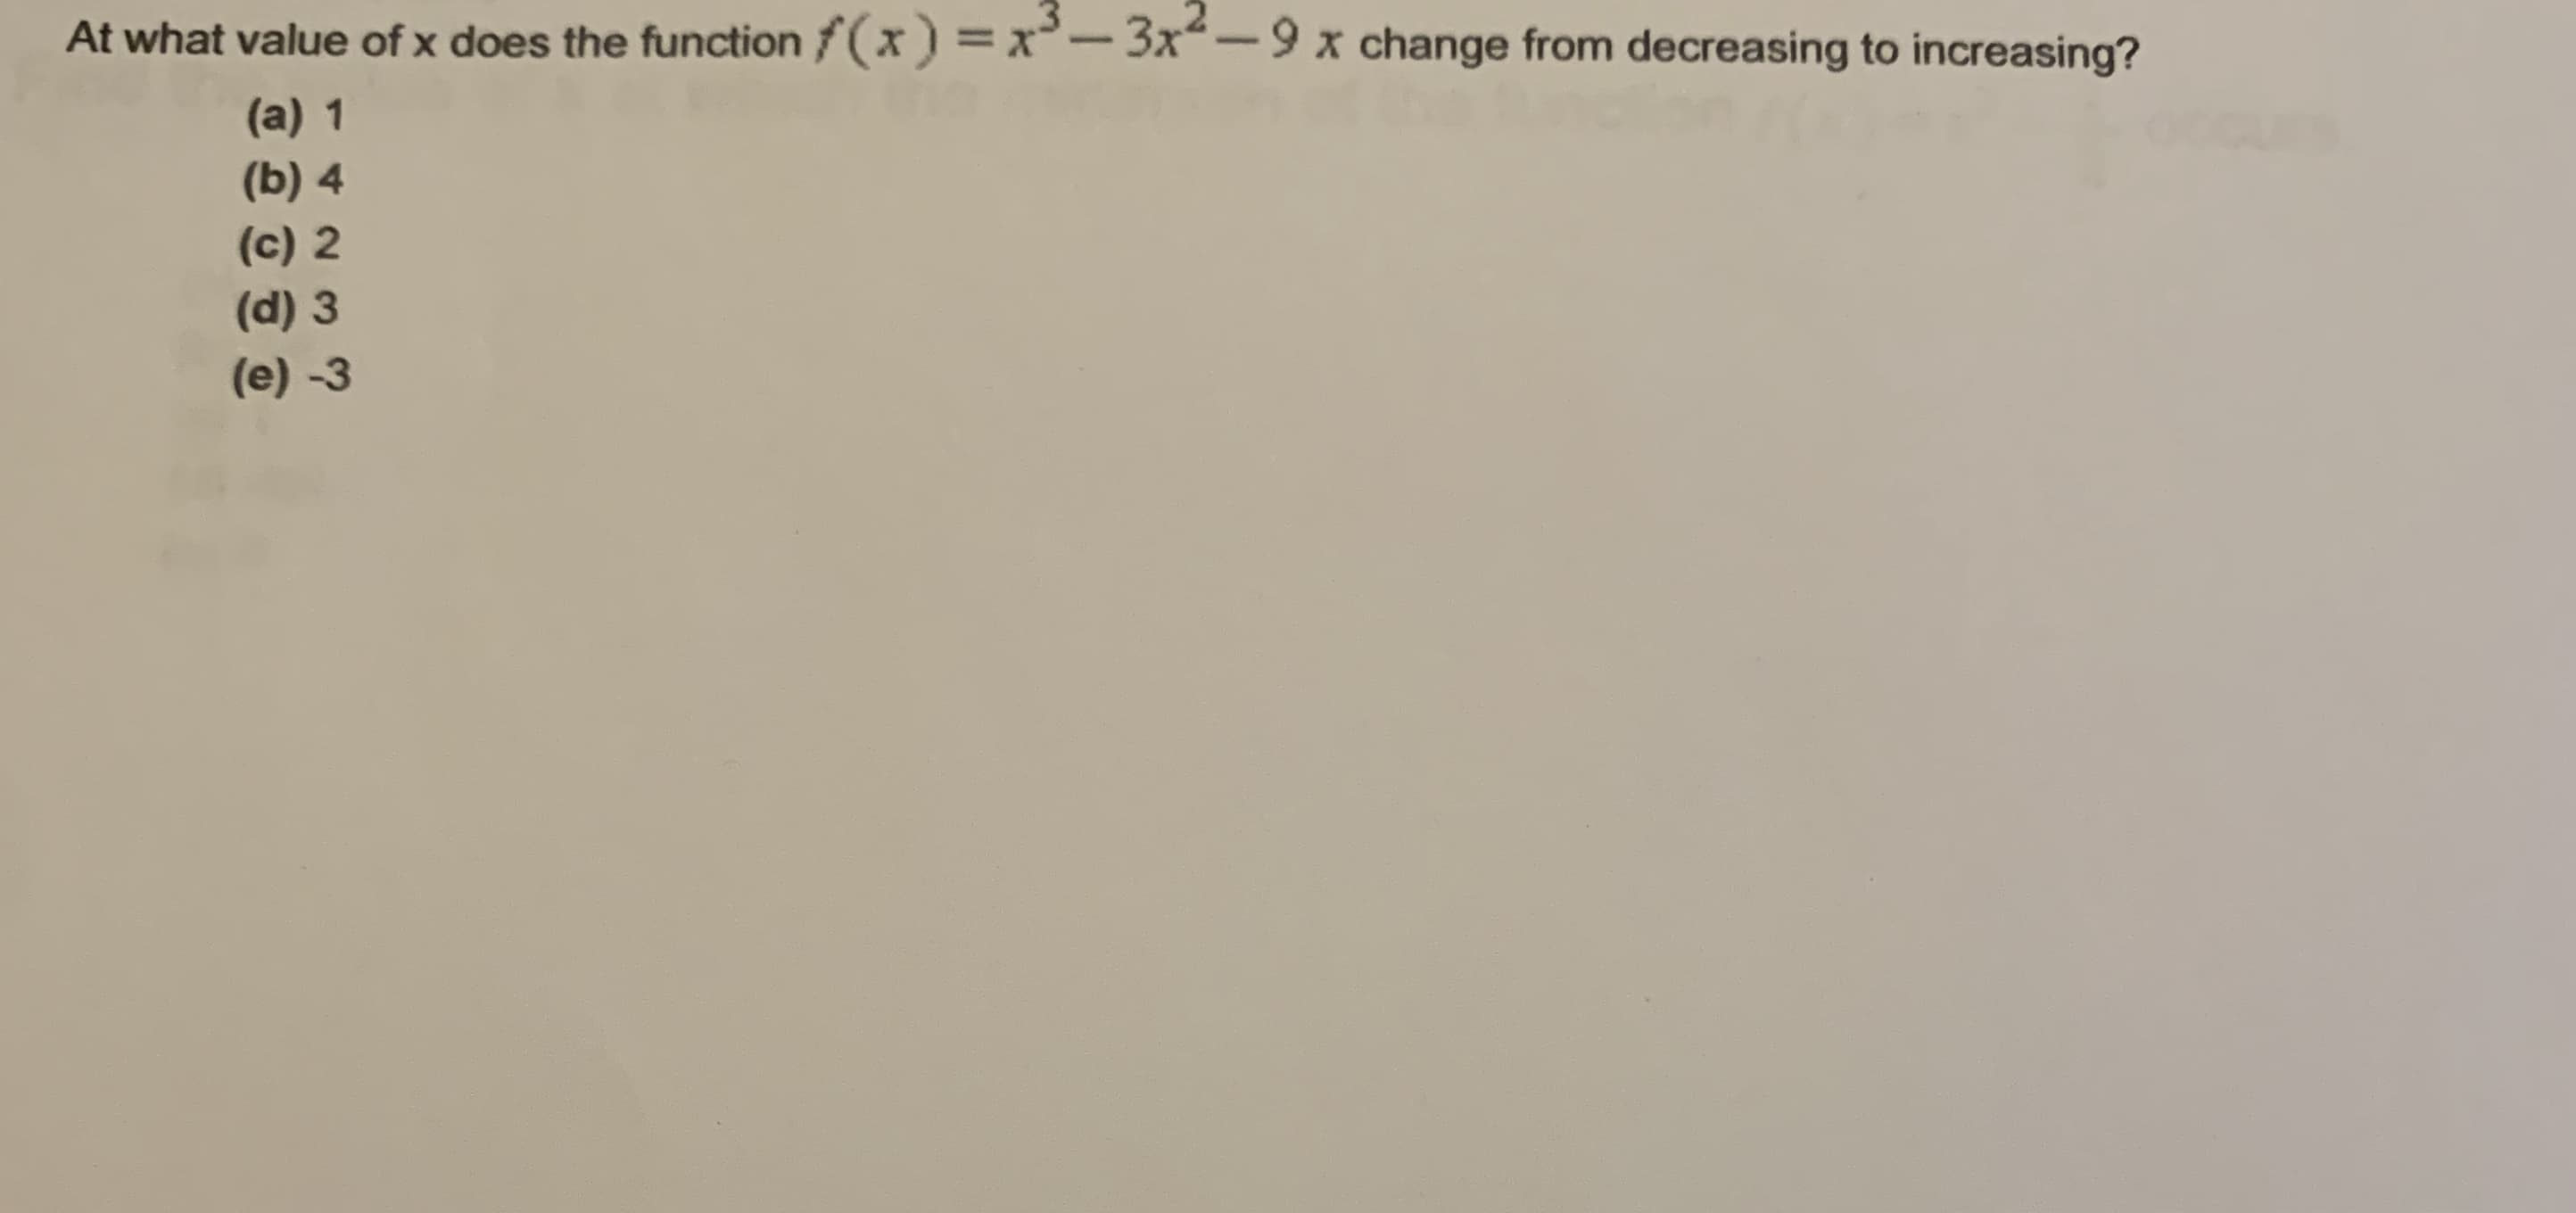 At what value of x does the function f(x) =x- 3x-9 x change from decreasing to increasing?
(a) 1
(b) 4
(c) 2
(d) 3
(e) -3
